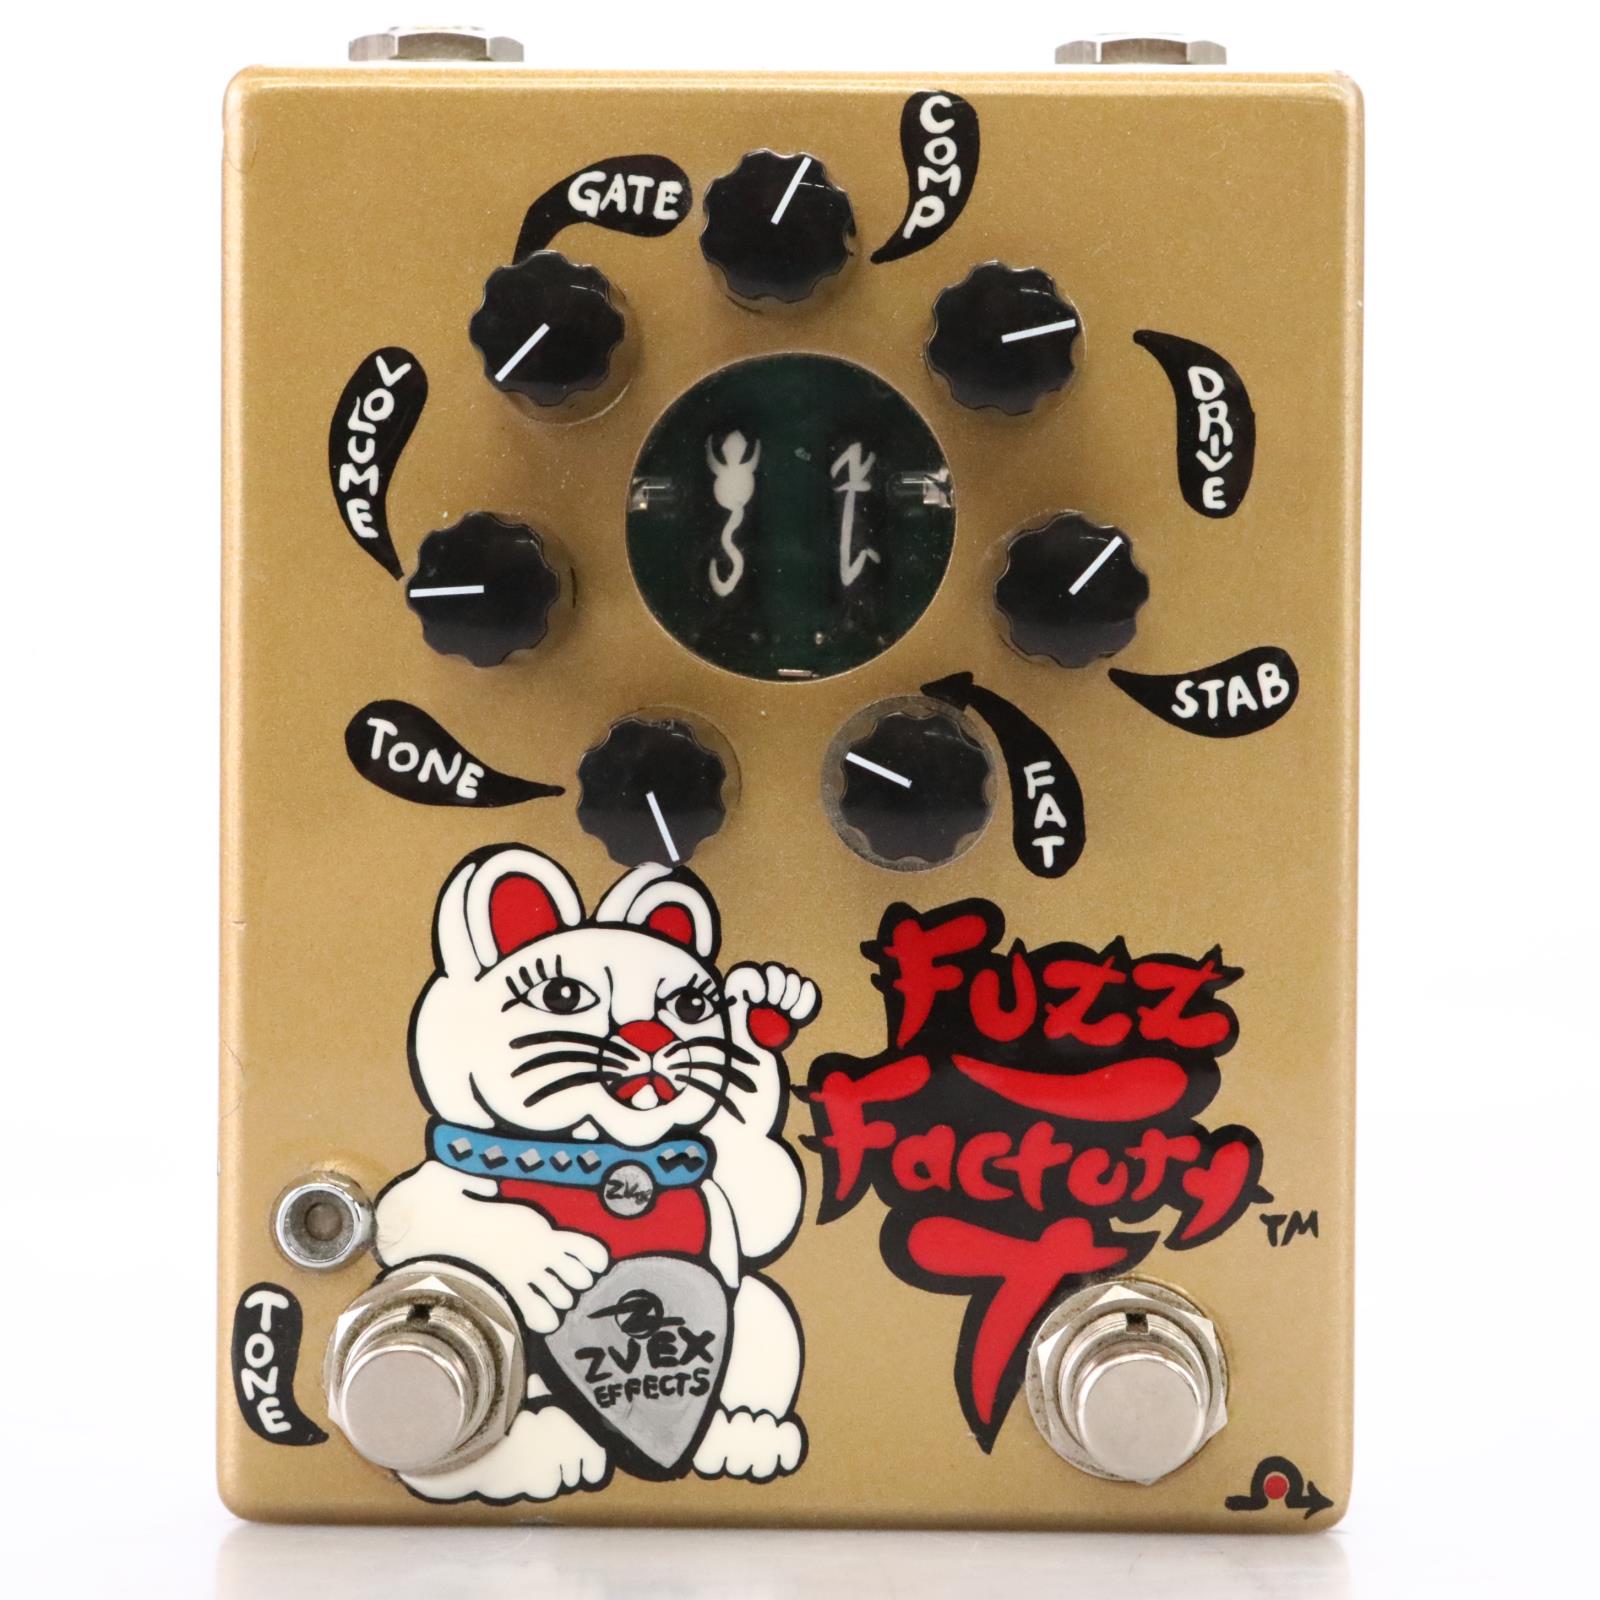 2015 Zvex Fuzz Factory 7 Limited Gold Edition Fuzz Guitar Effects Pedal #50320